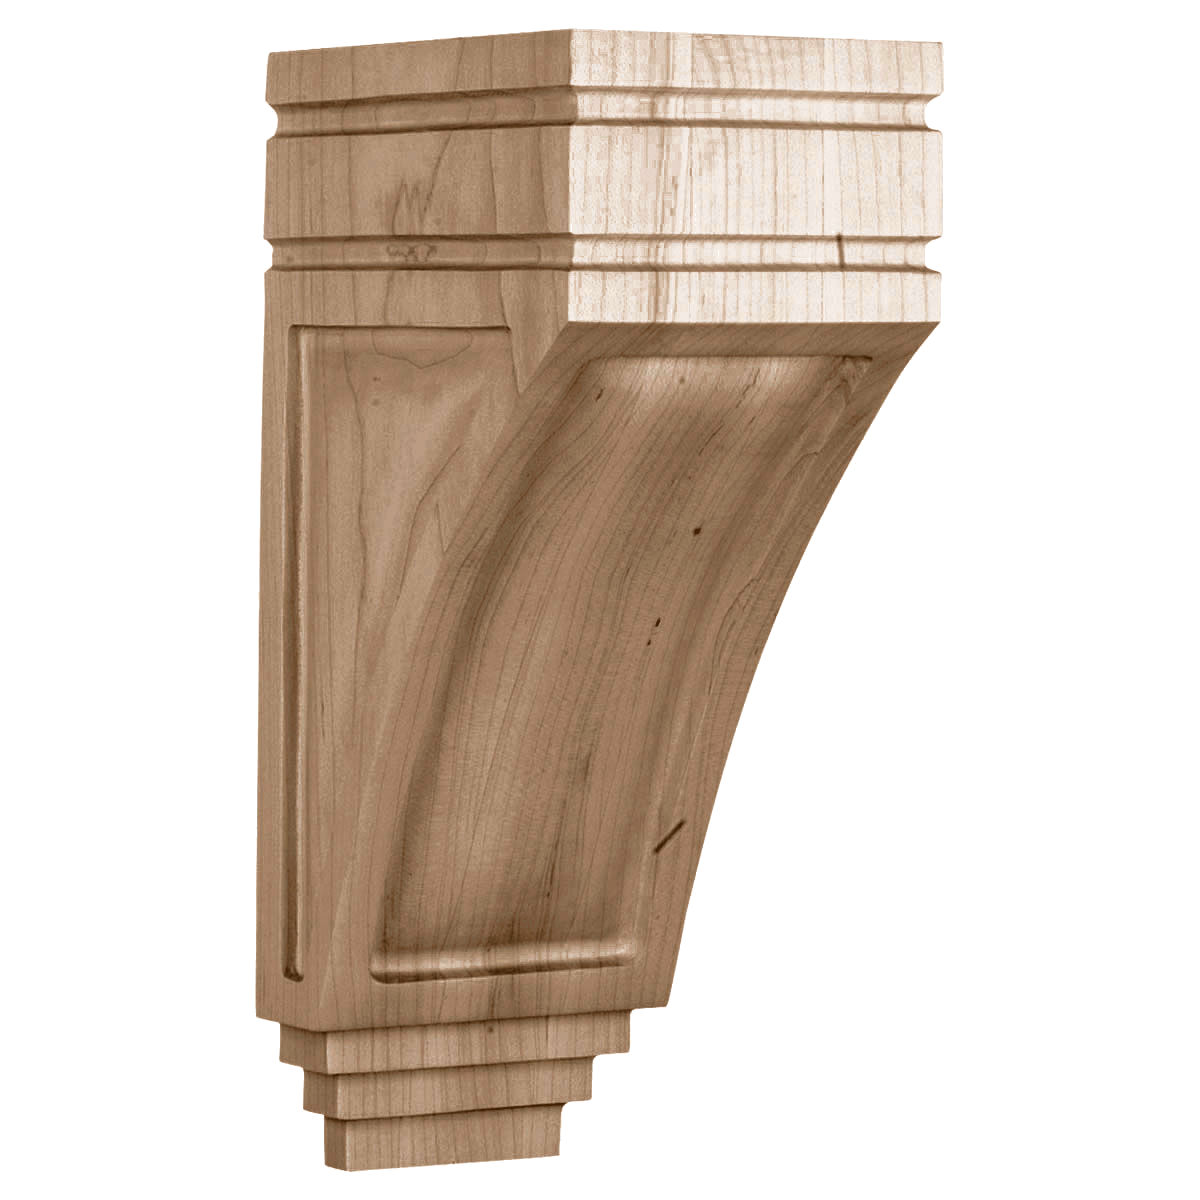 Fluted corbels